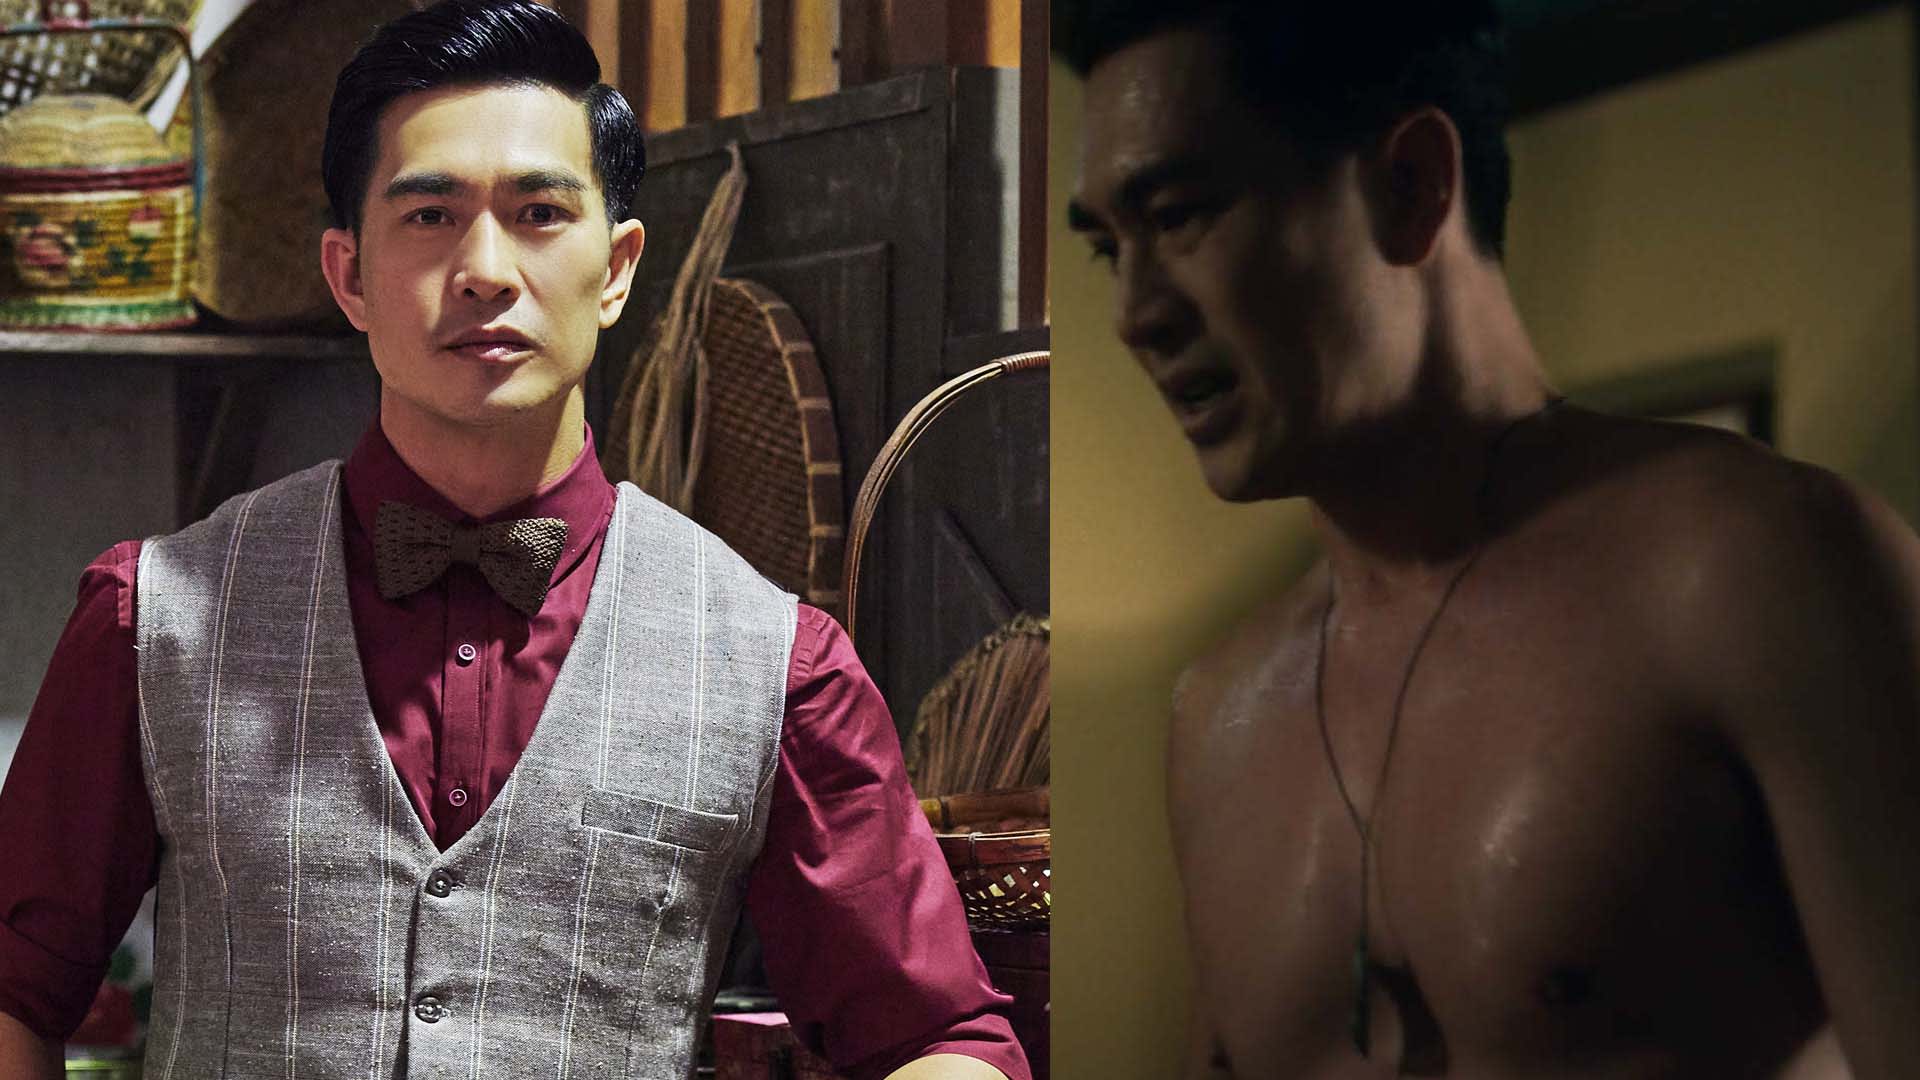 Pierre Png On His Shirtless Push-Up Scenes in This Land Is Mine: “I Was Blessed With A Director Of Photography Who Lighted Me In All The Right Areas”